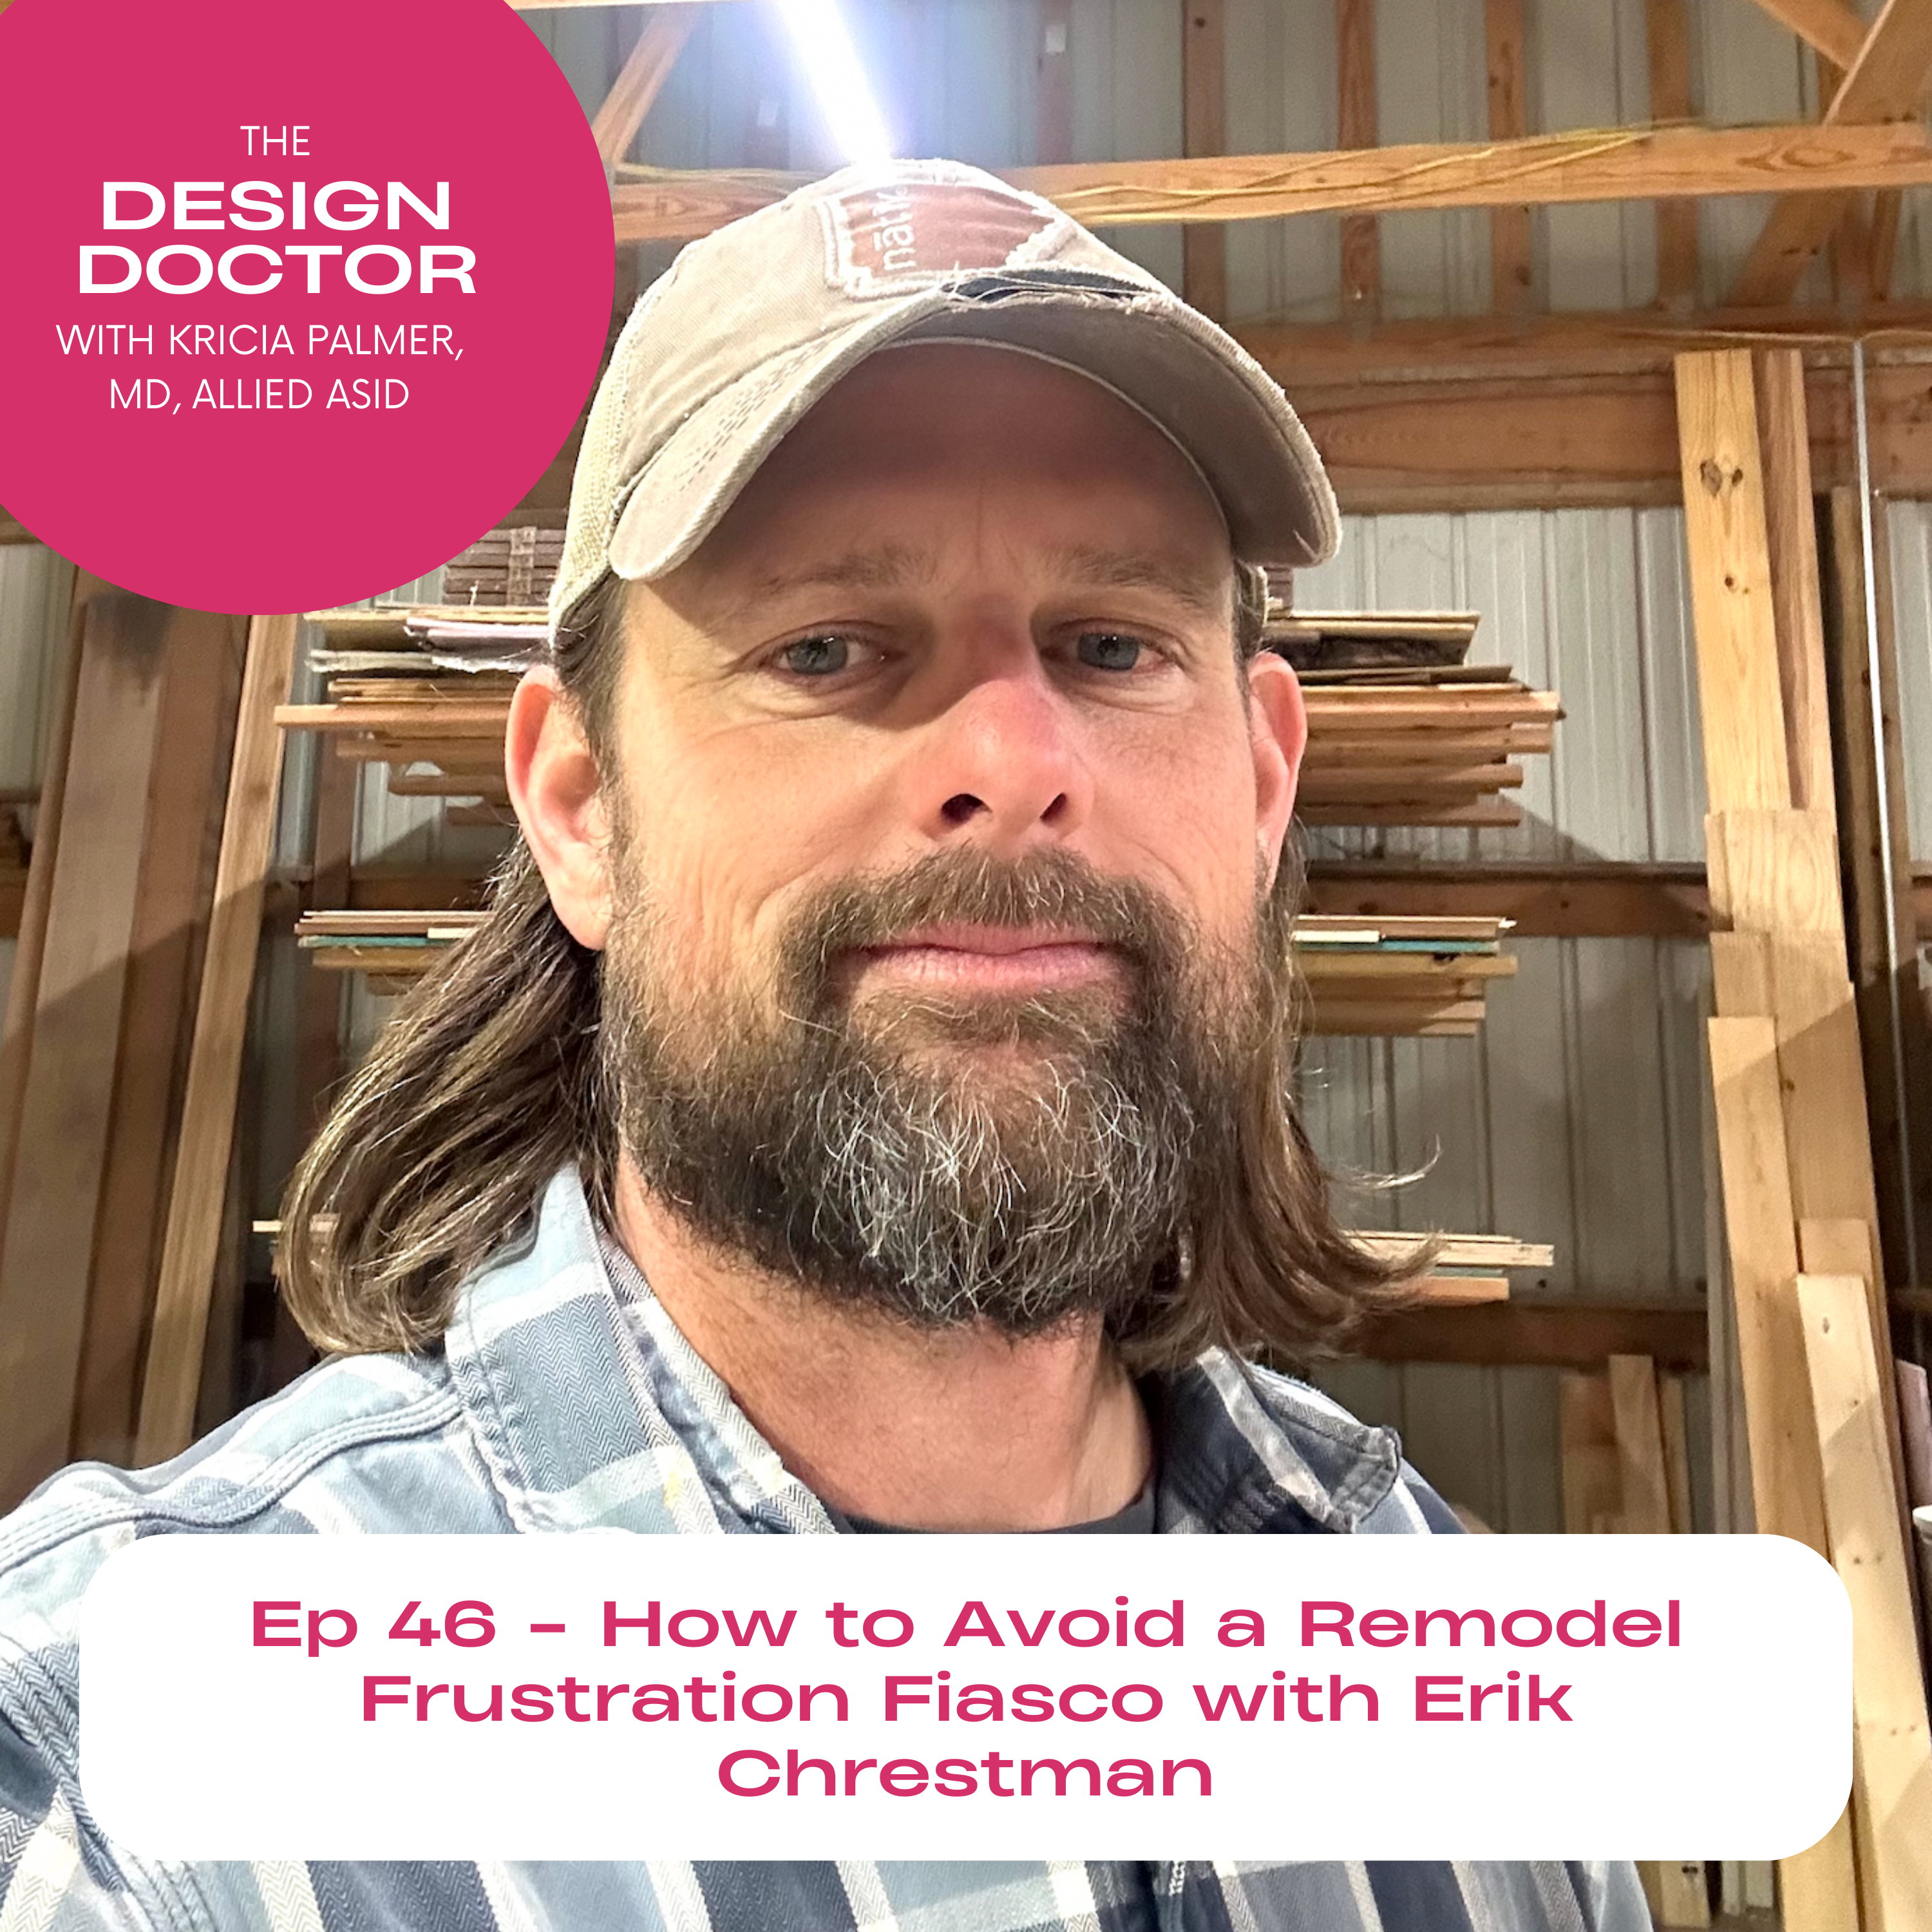 Episode 46 - How to Avoid a Remodel Frustration Fiasco with Erik Chrestman